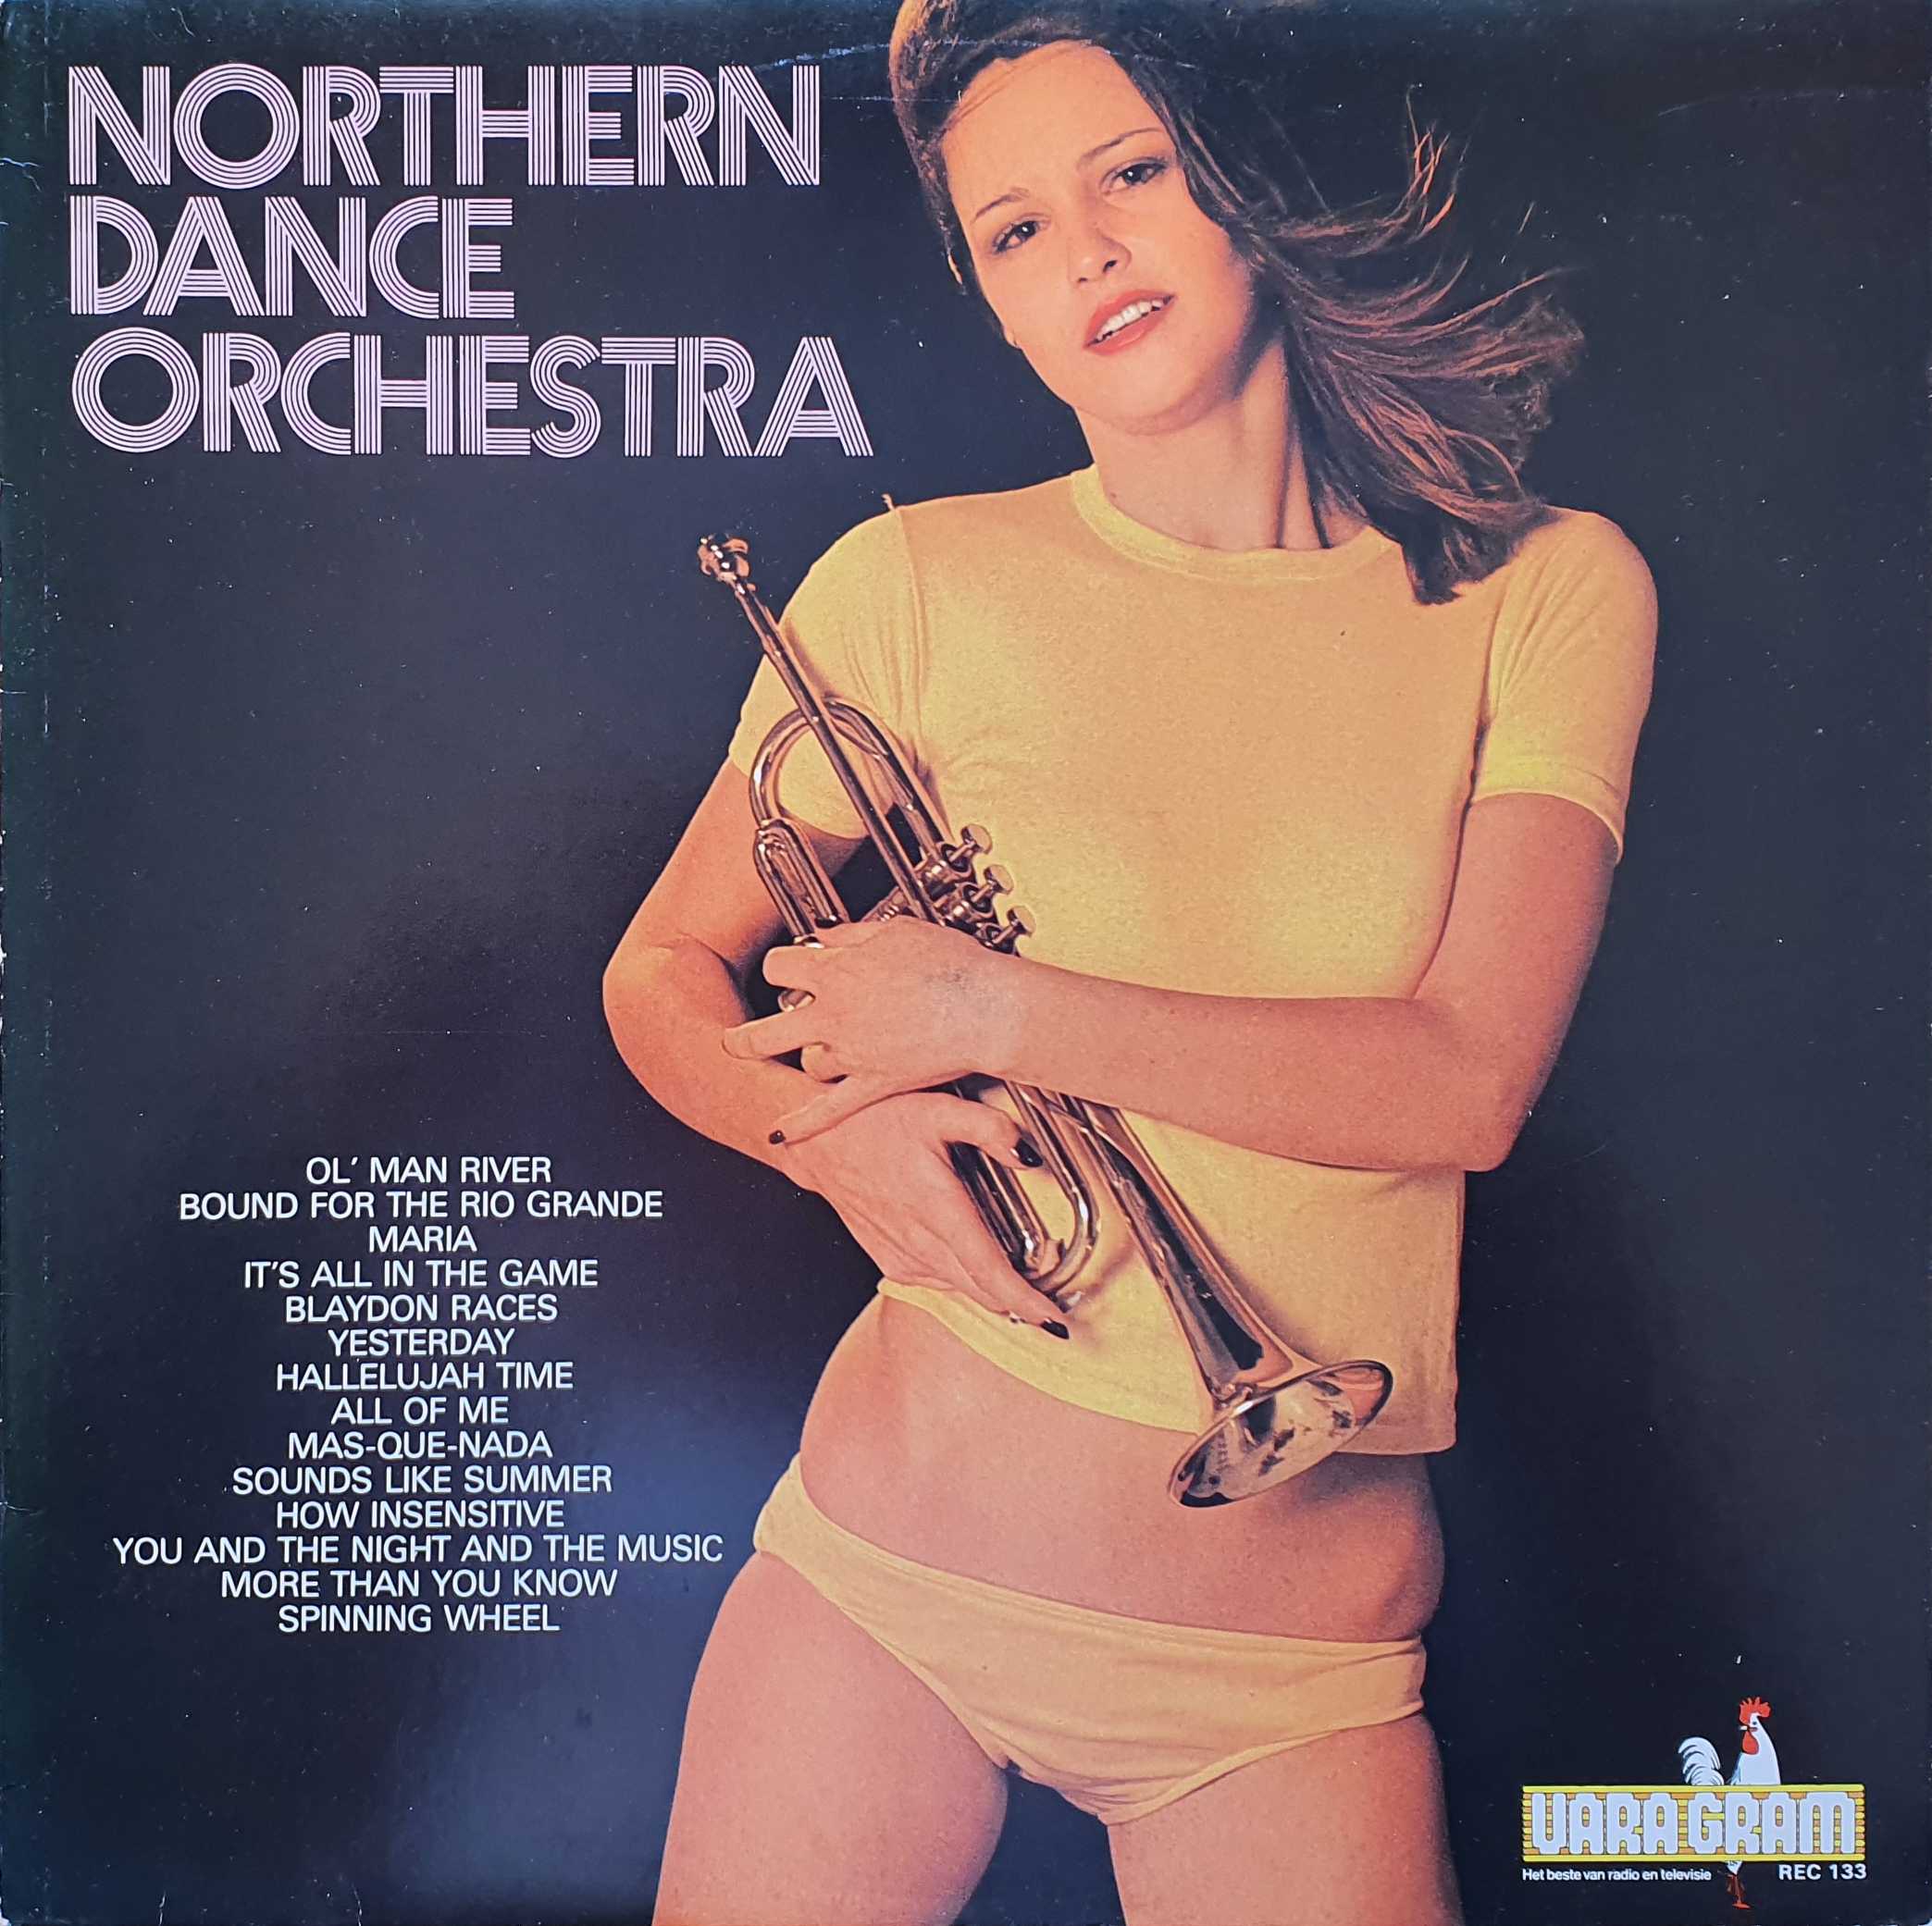 Picture of REC 133-iD Northern dance orchestra by artist Various from the BBC albums - Records and Tapes library